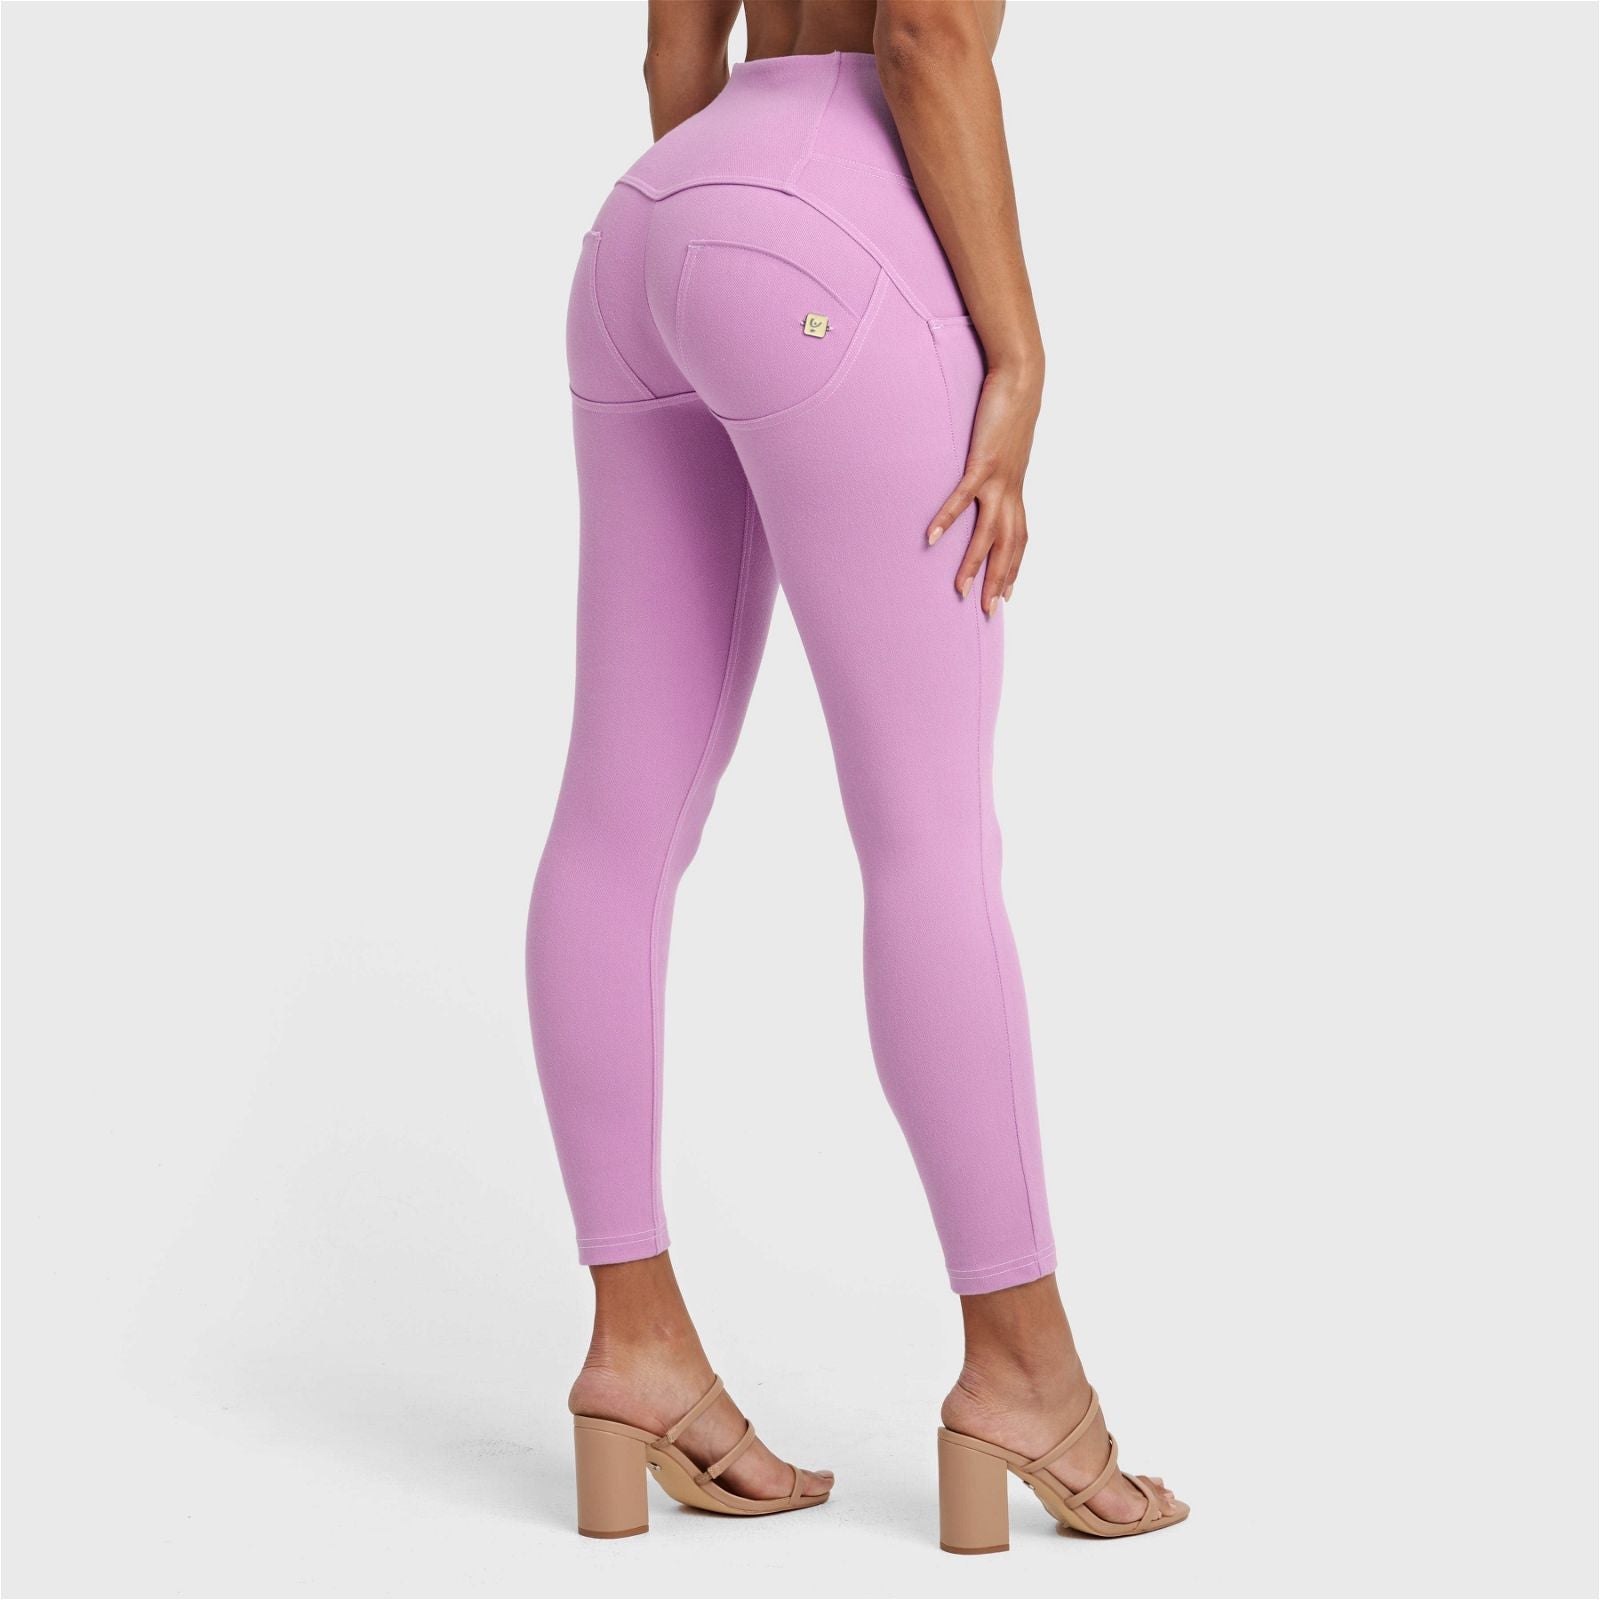 WR.UP® Drill Limited Edition - High Waisted - 7/8 Length - Lilac 1